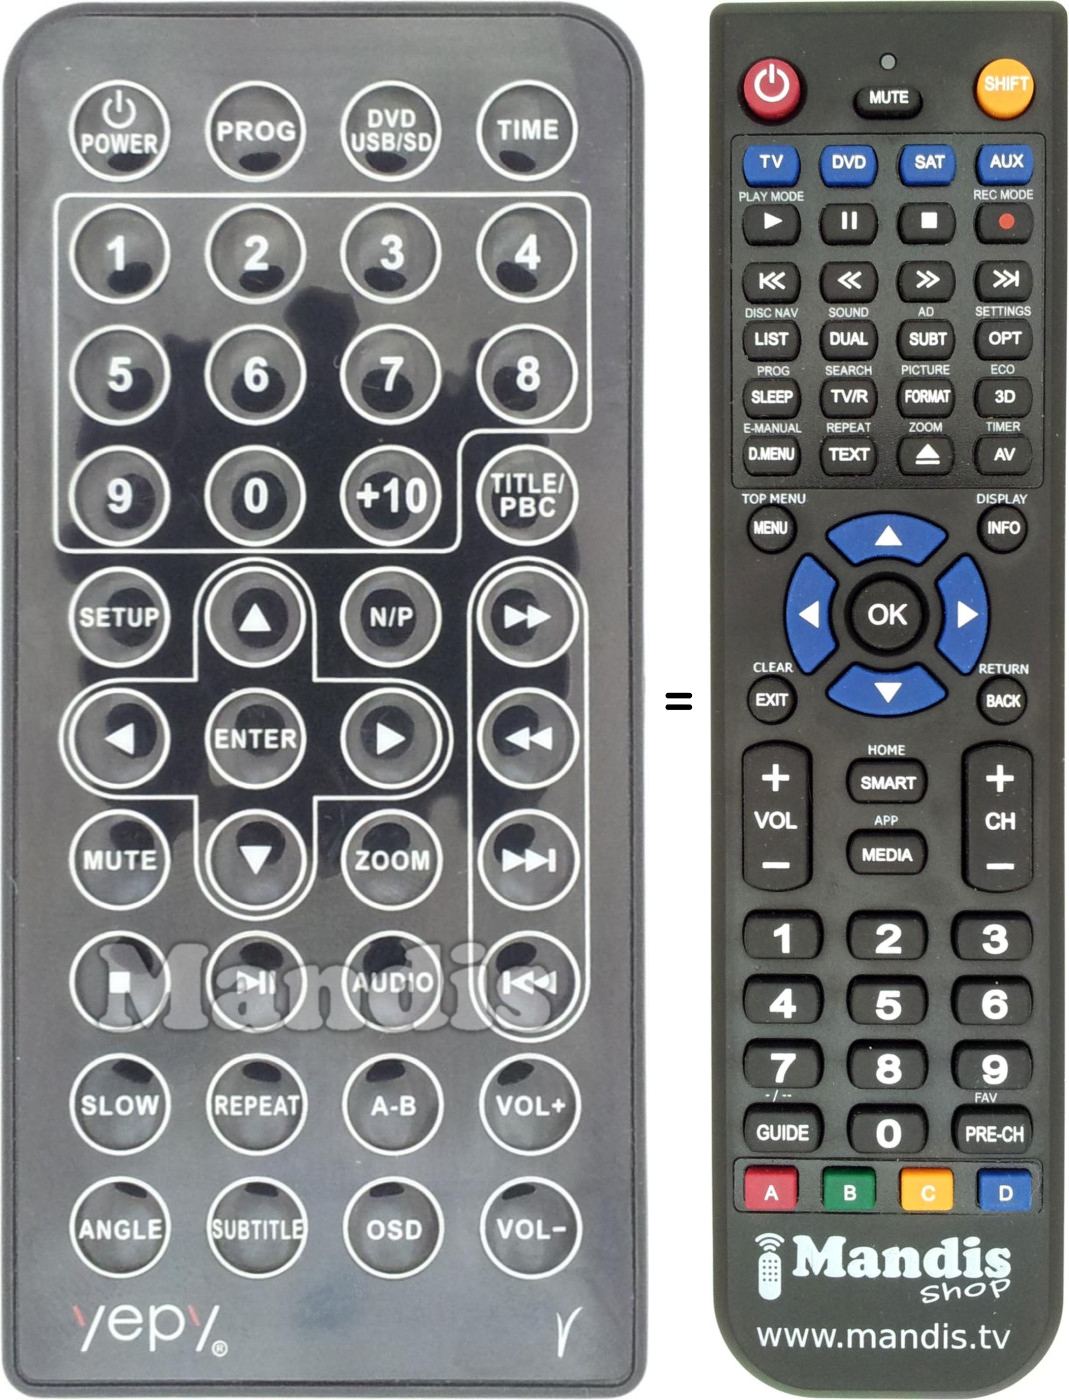 Replacement remote control Yepy001